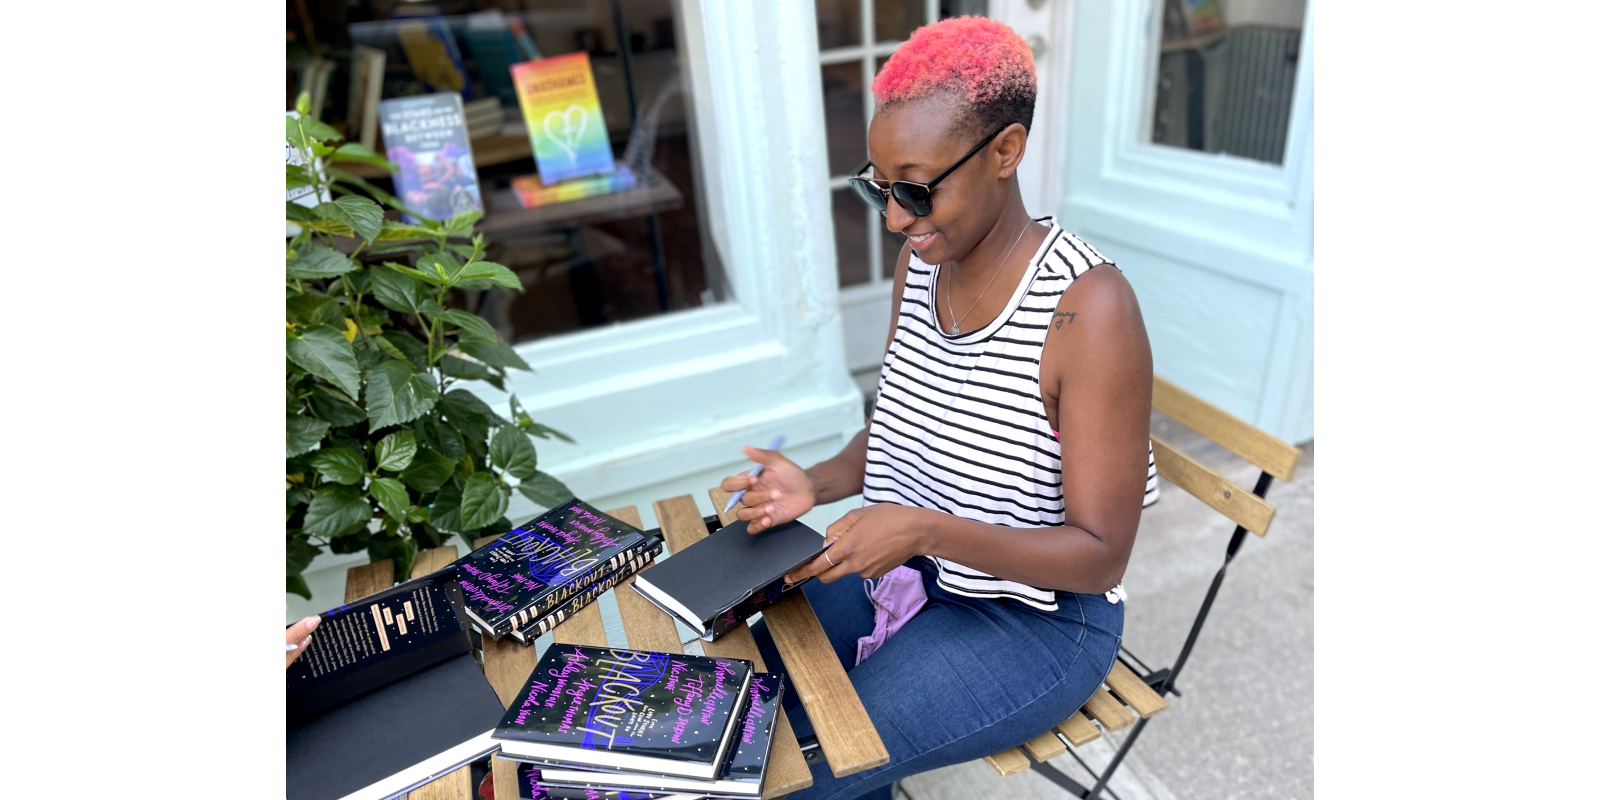 Ashley in pink hair and sunglasses, looking down and signing a book, outside a bookstore.